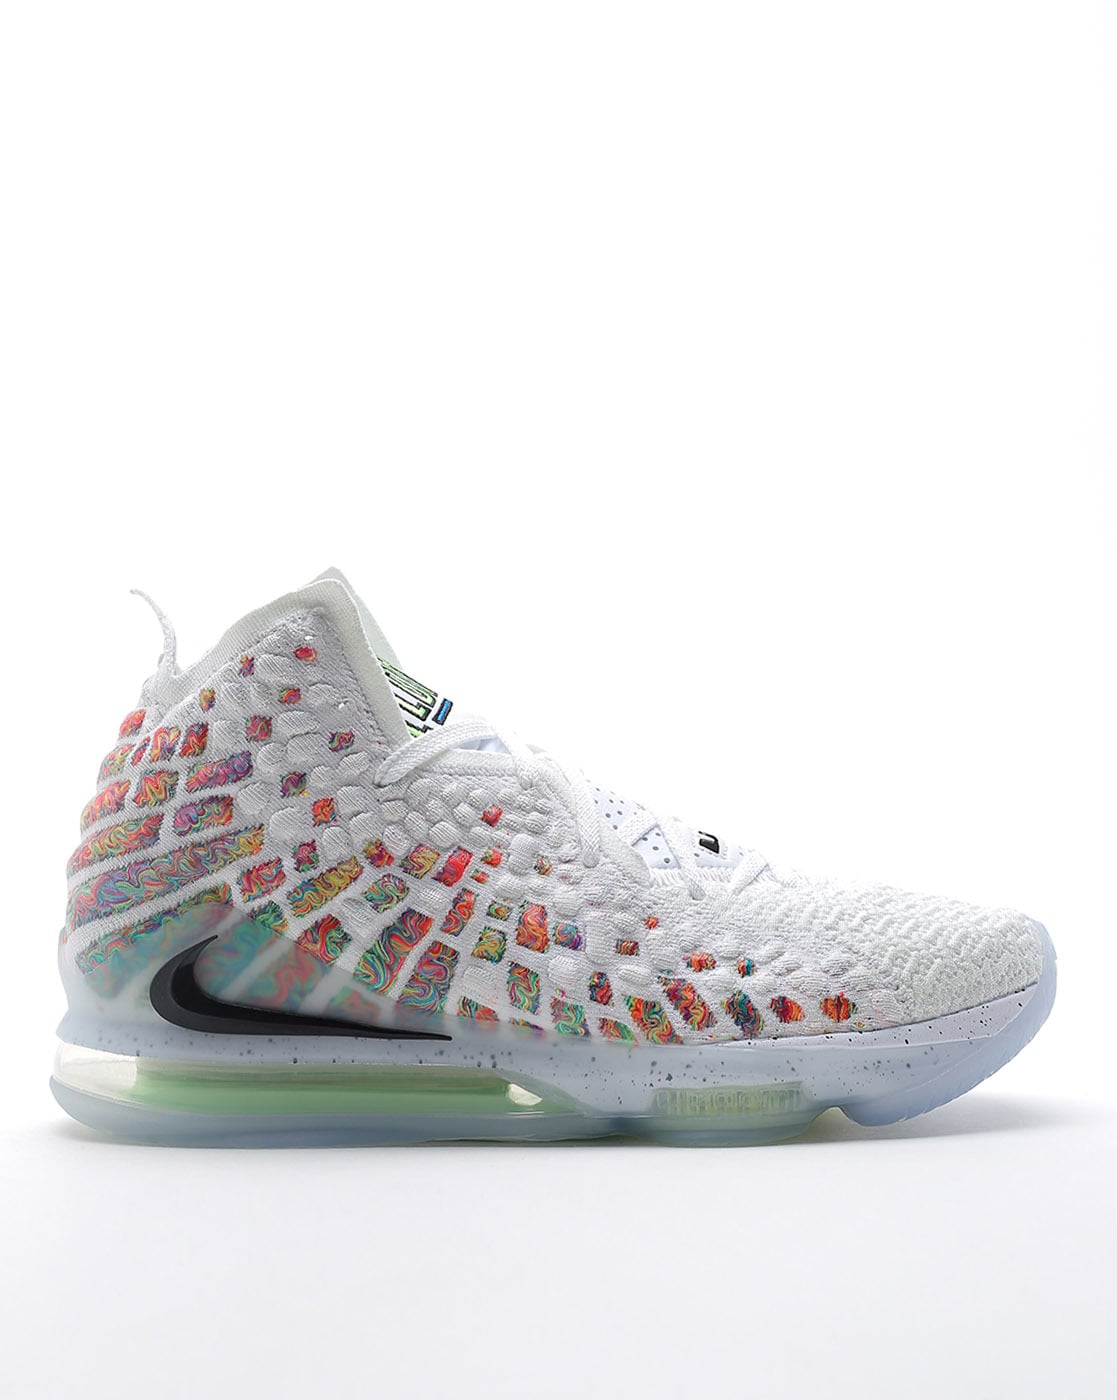 lebrons shoes white